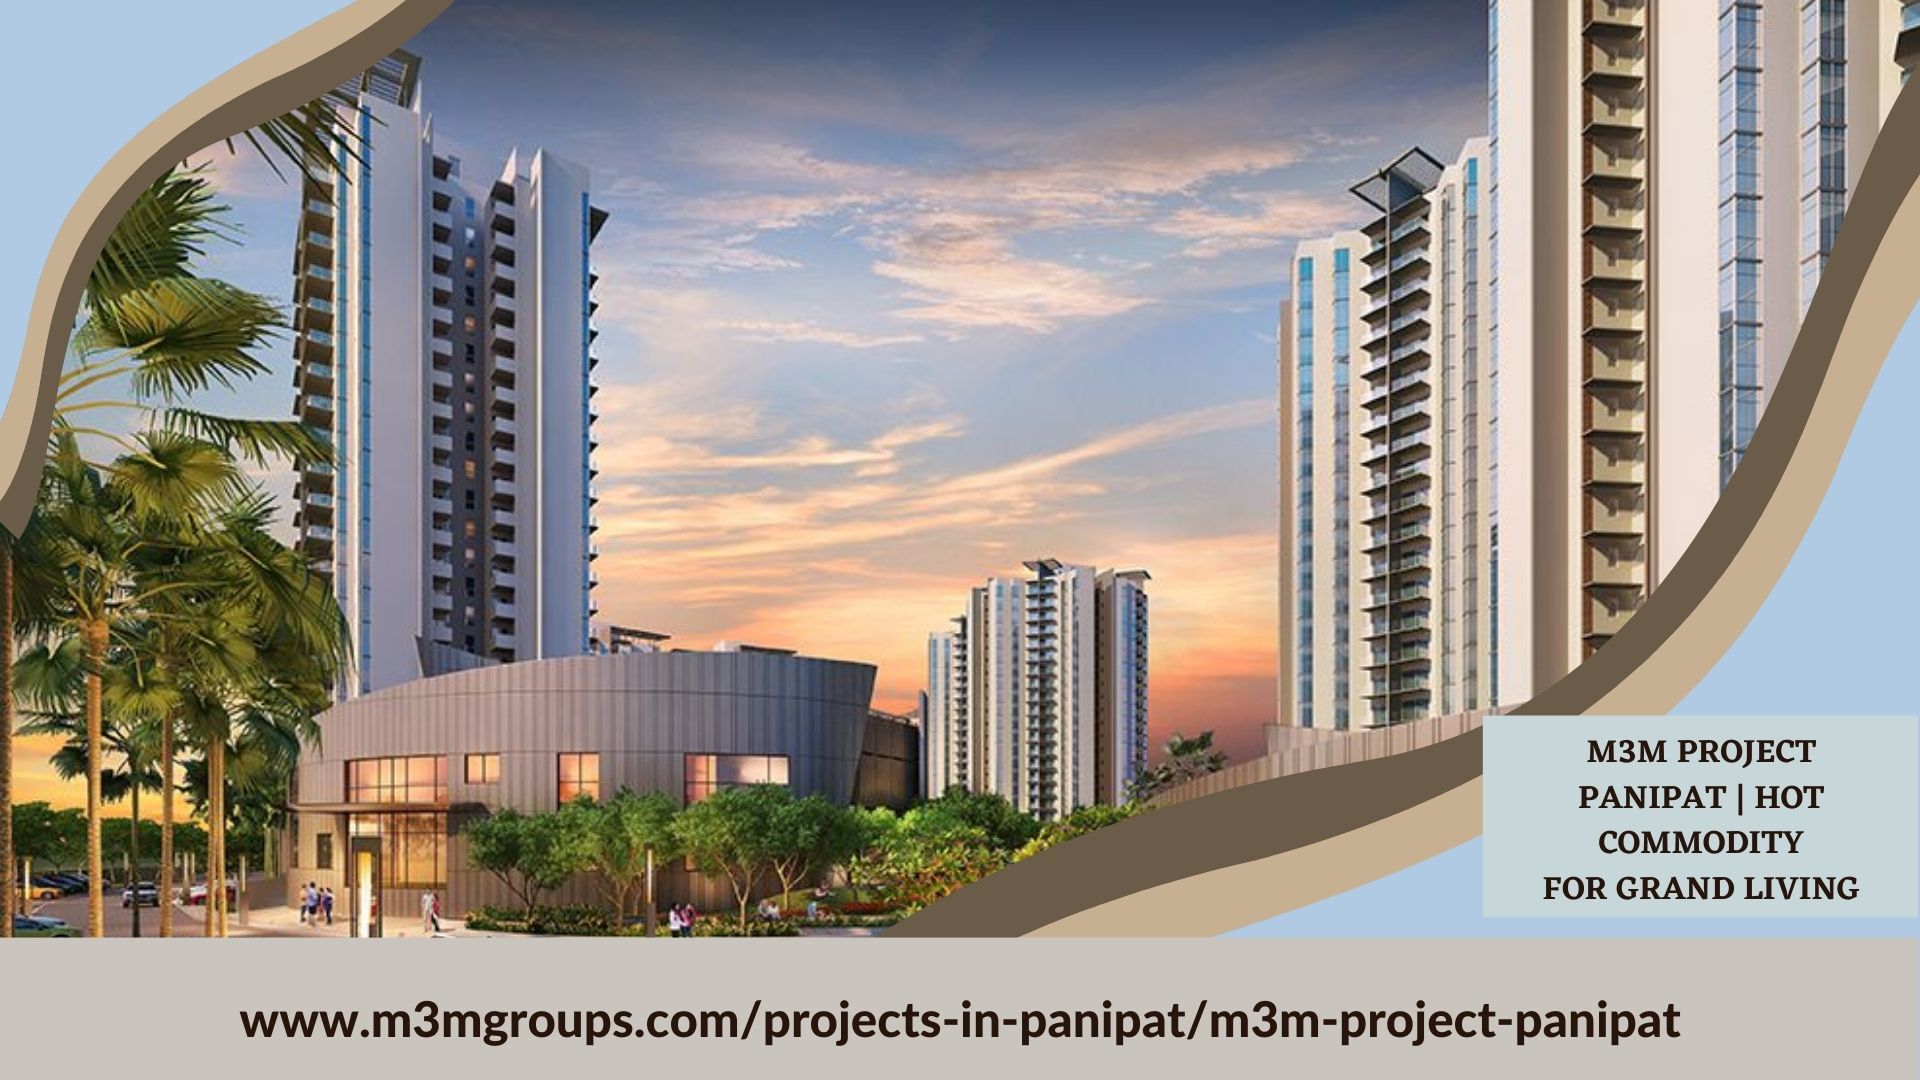 M3M Project Panipat | Precisely Planned And Thoughtfully Created